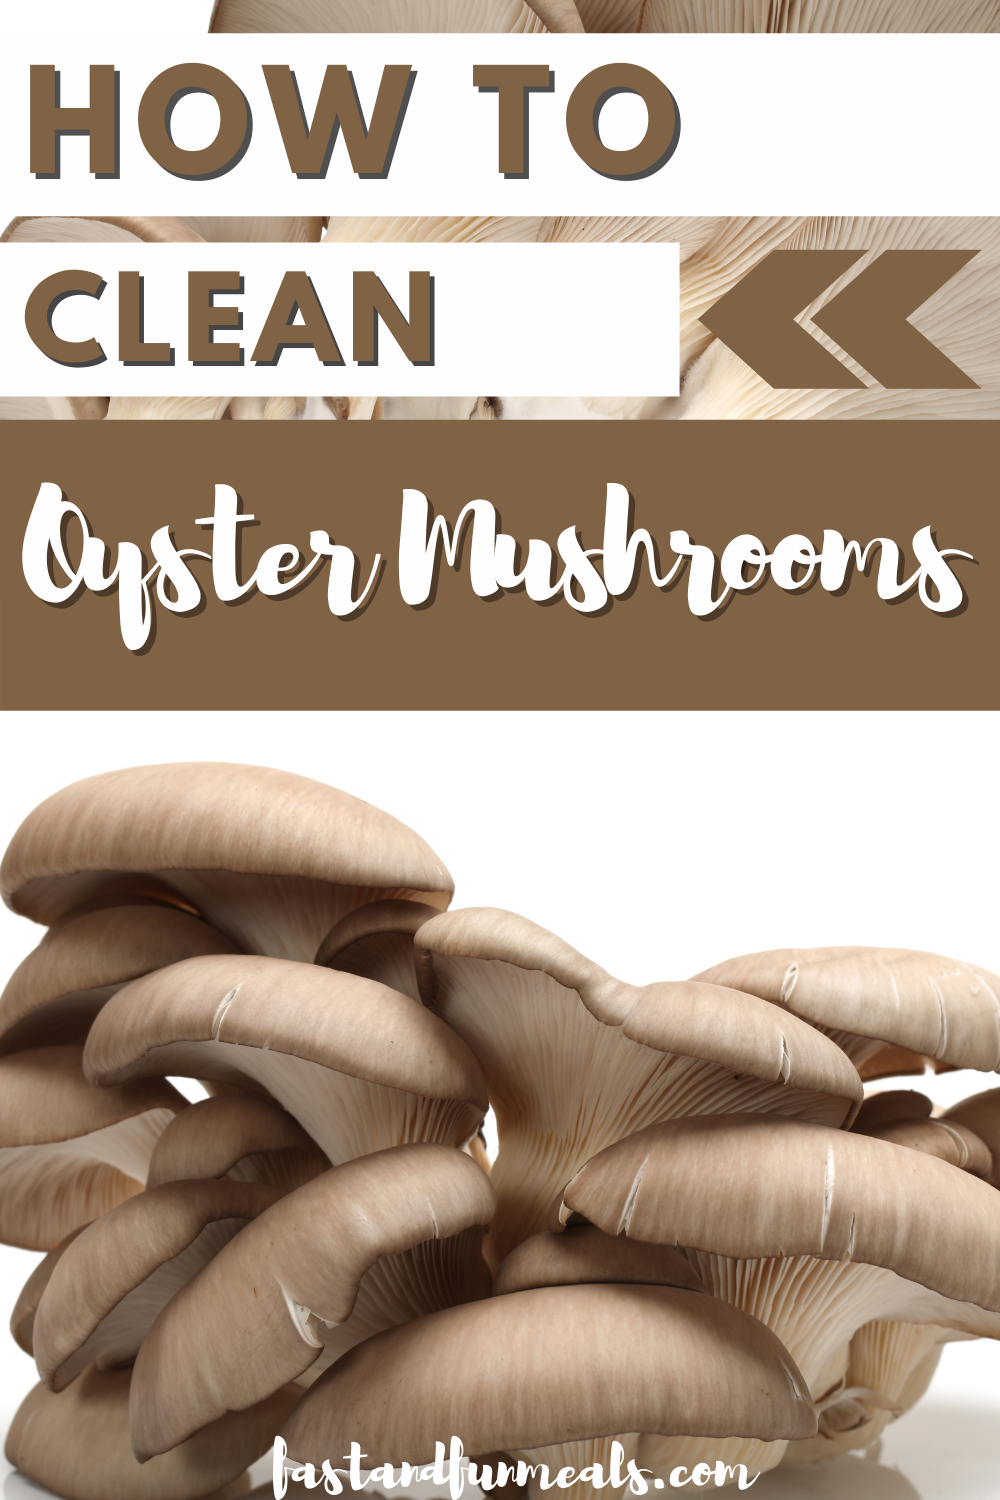 Pin showing the title How to Clean Oyster Mushrooms